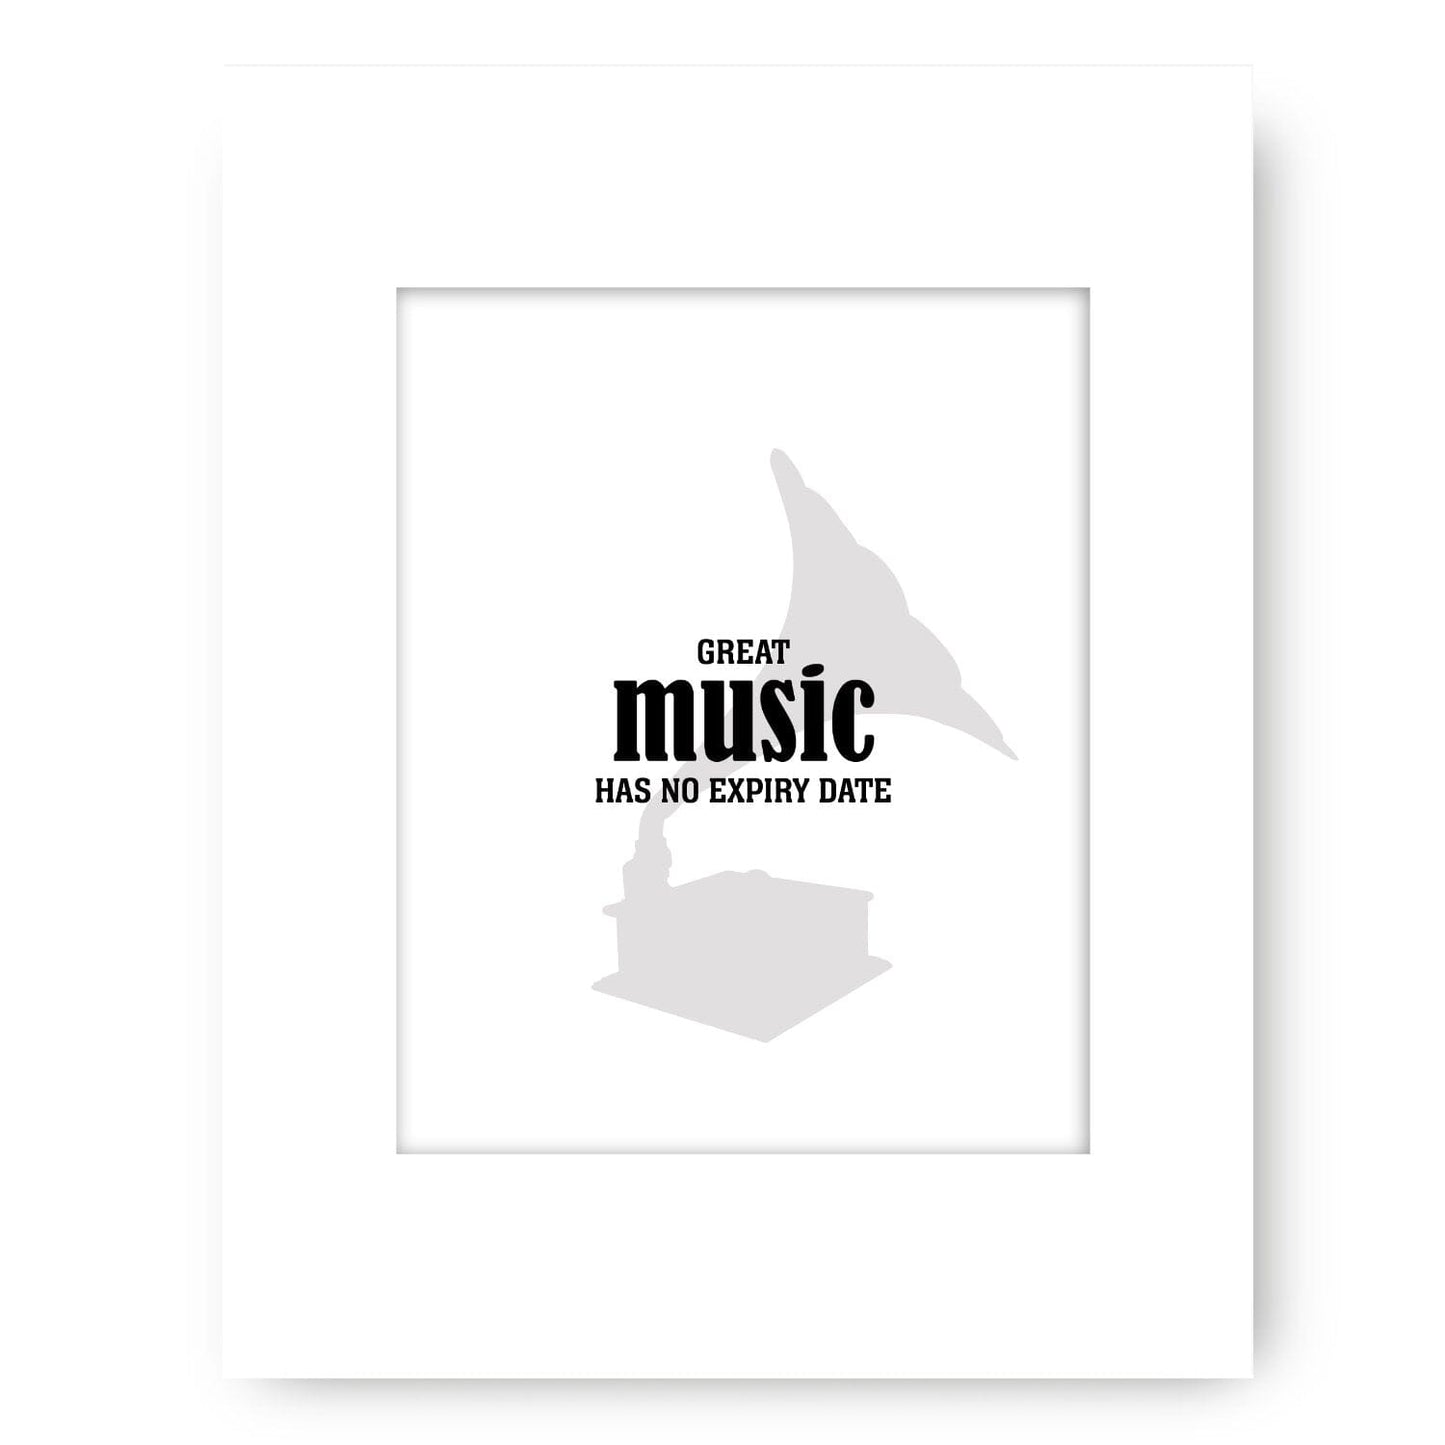 Great Music Has No Expiry Date - Wise and Witty Art Wise and Wiseass Quotes Song Lyrics Art 8x10 White Matted Print 